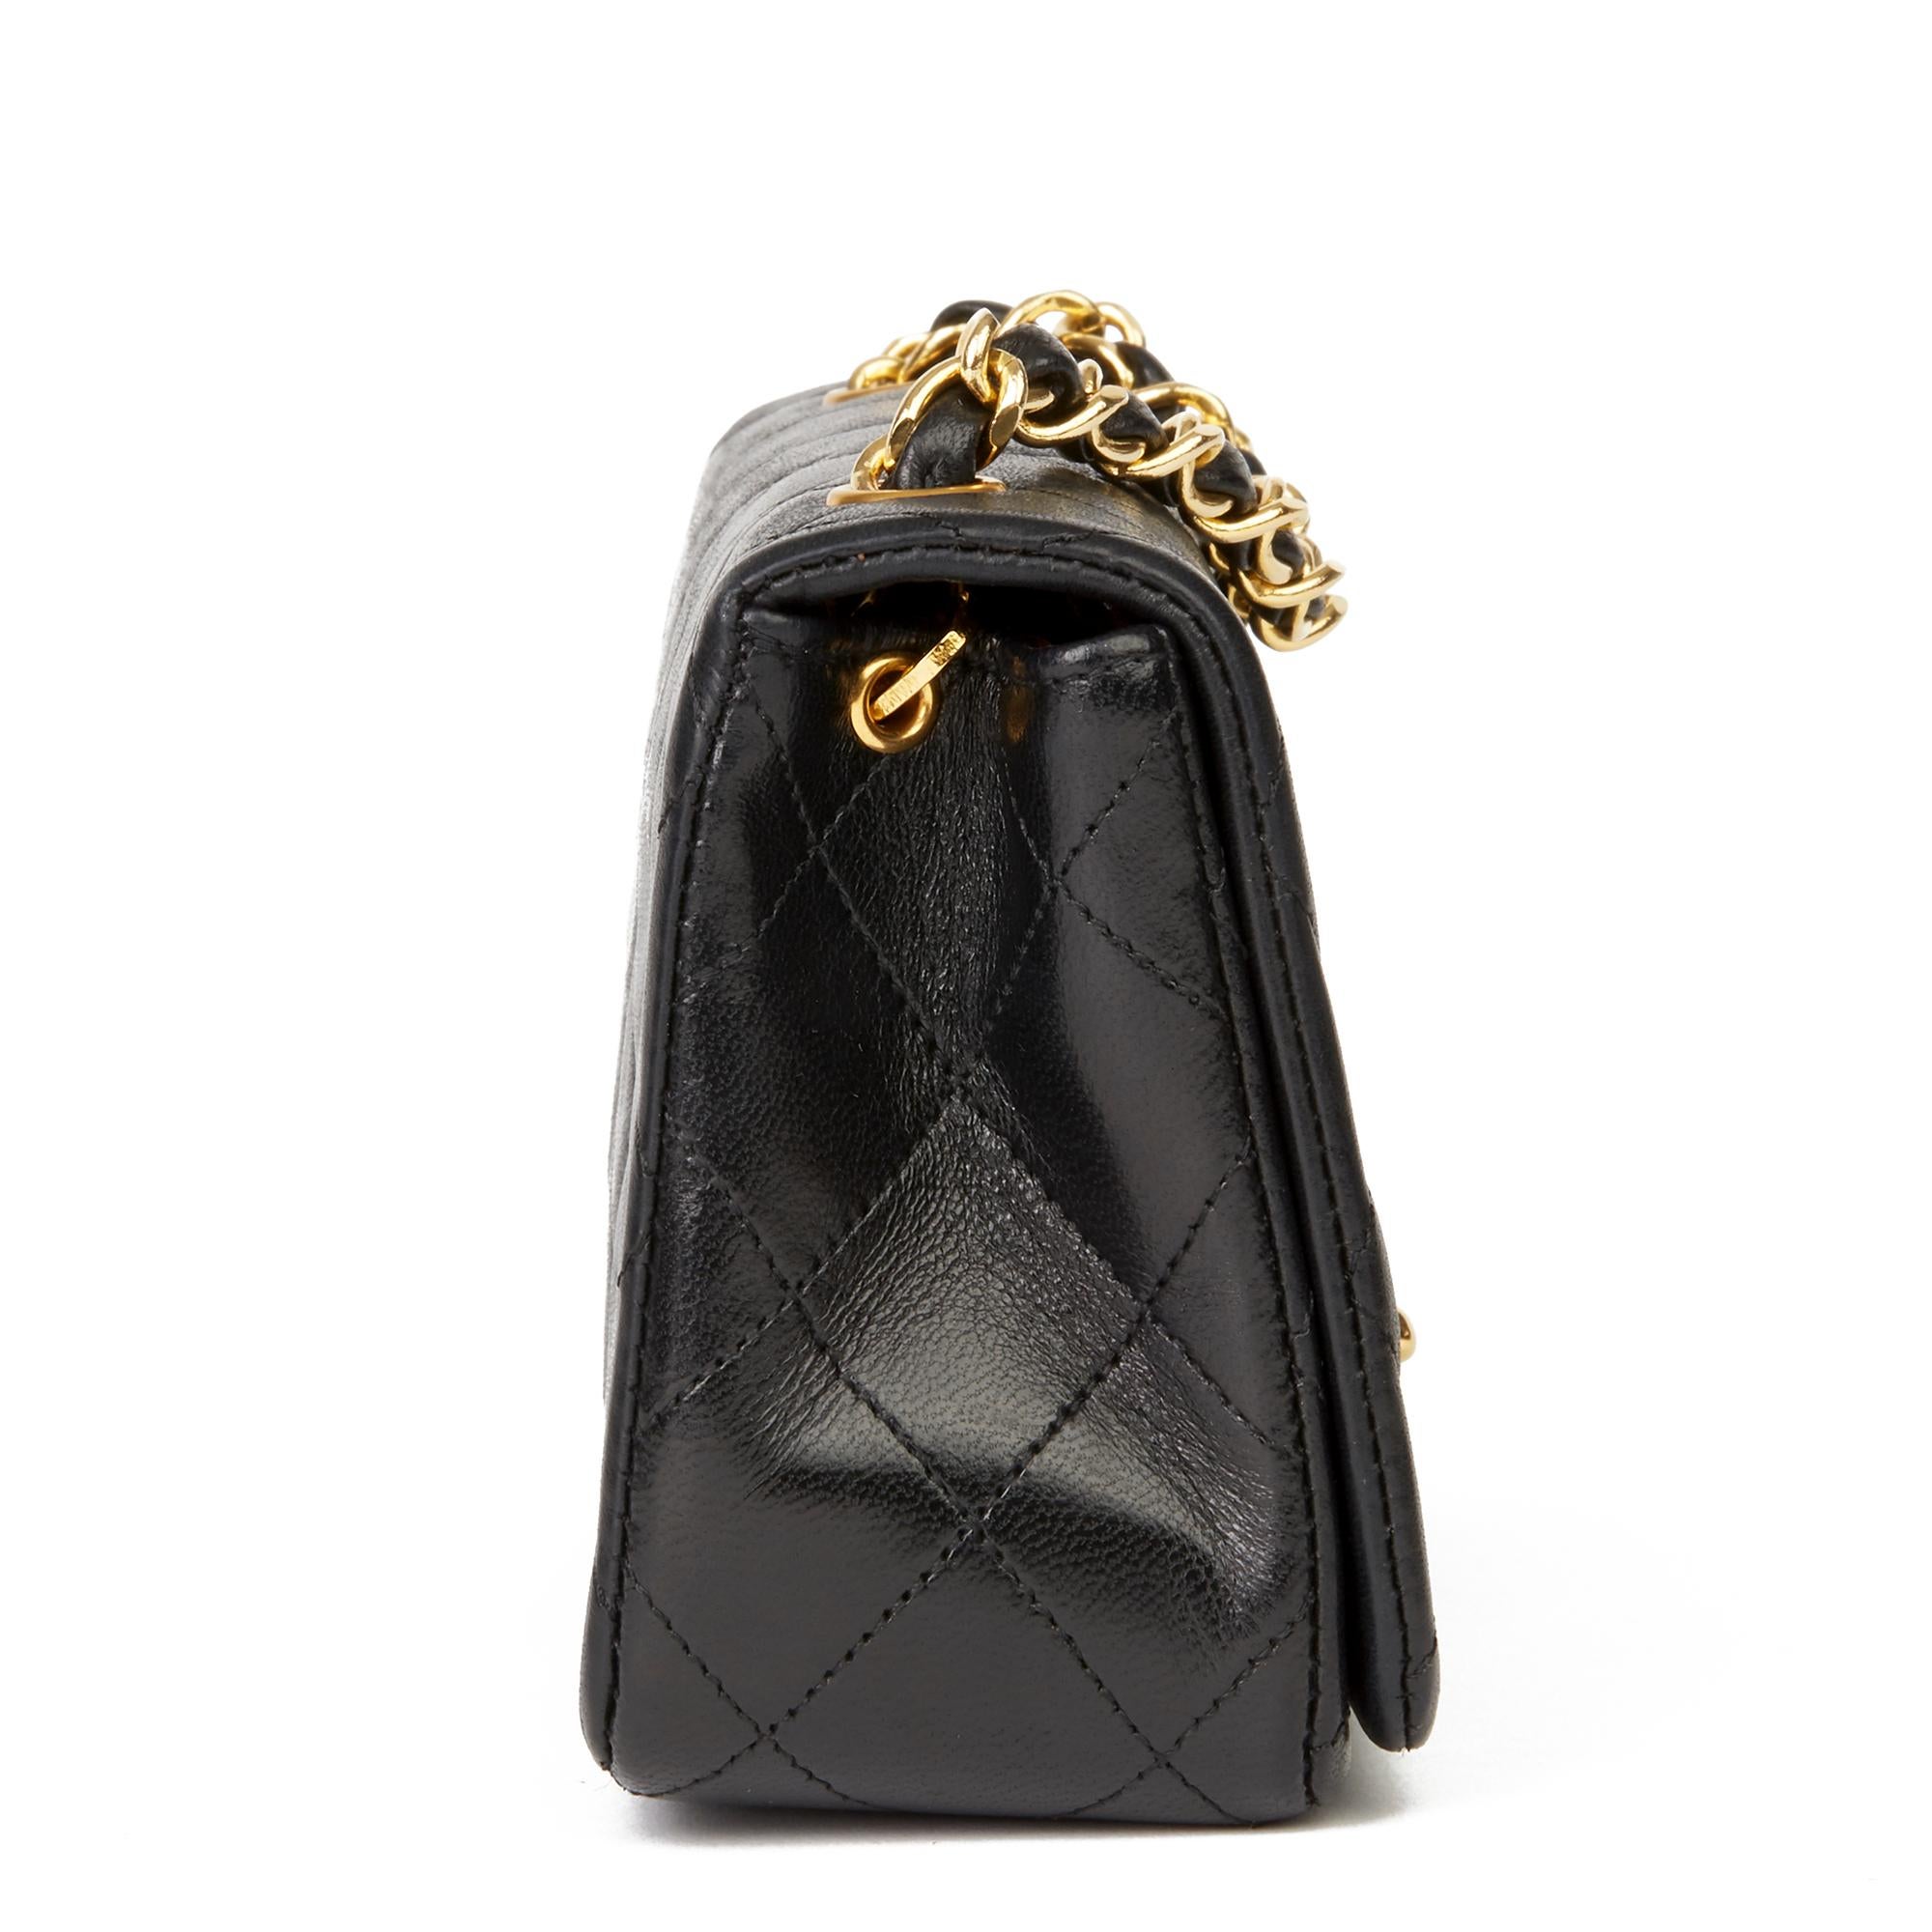 CHANEL
Black Quilted Lambskin Vintage Mini Flap Bag

Reference: HB2813
Serial Number: 1262197
Age (Circa): 1991
Accompanied By: Chanel Dust Bag, Box, Authenticity Card
Authenticity Details: Serial Sticker, Authenticity Card (Made in France)
Gender: